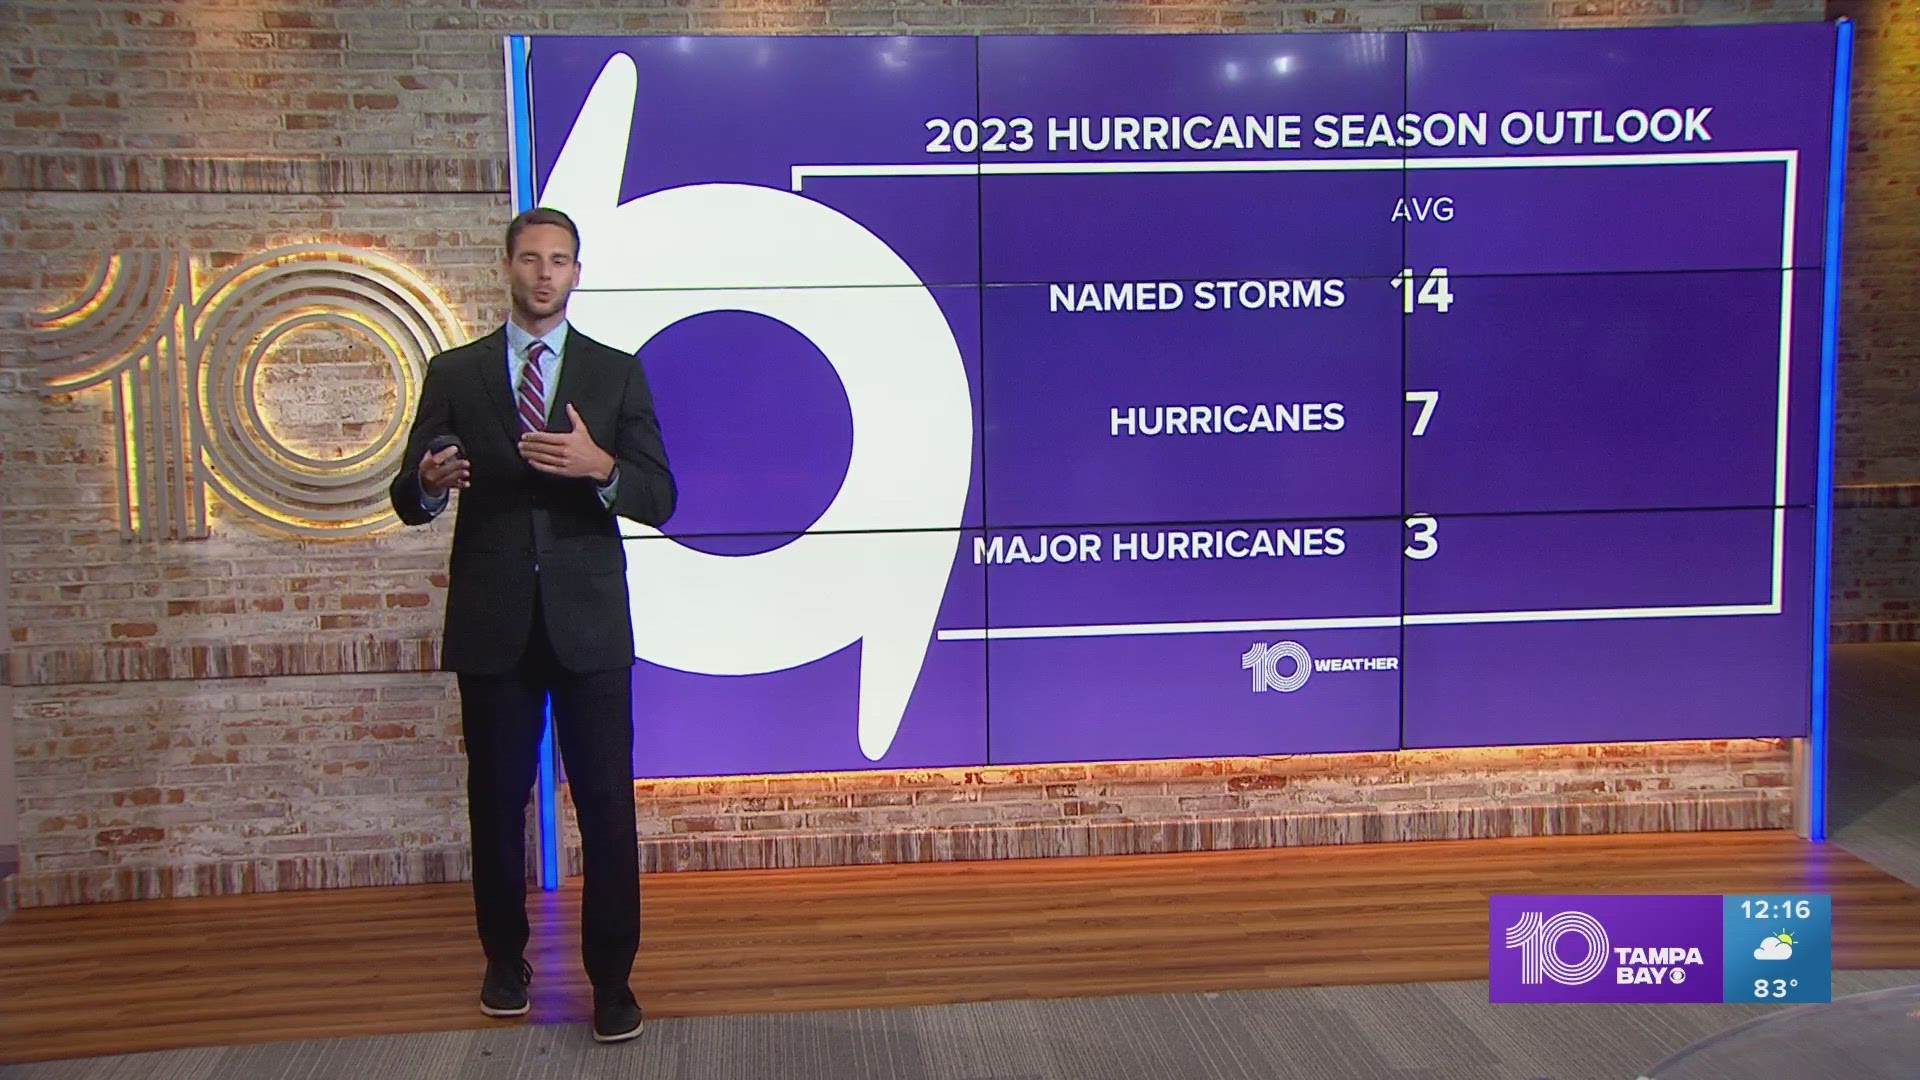 With hurricane season officially starting in one week, NOAA is giving us a look at what to expect this year.